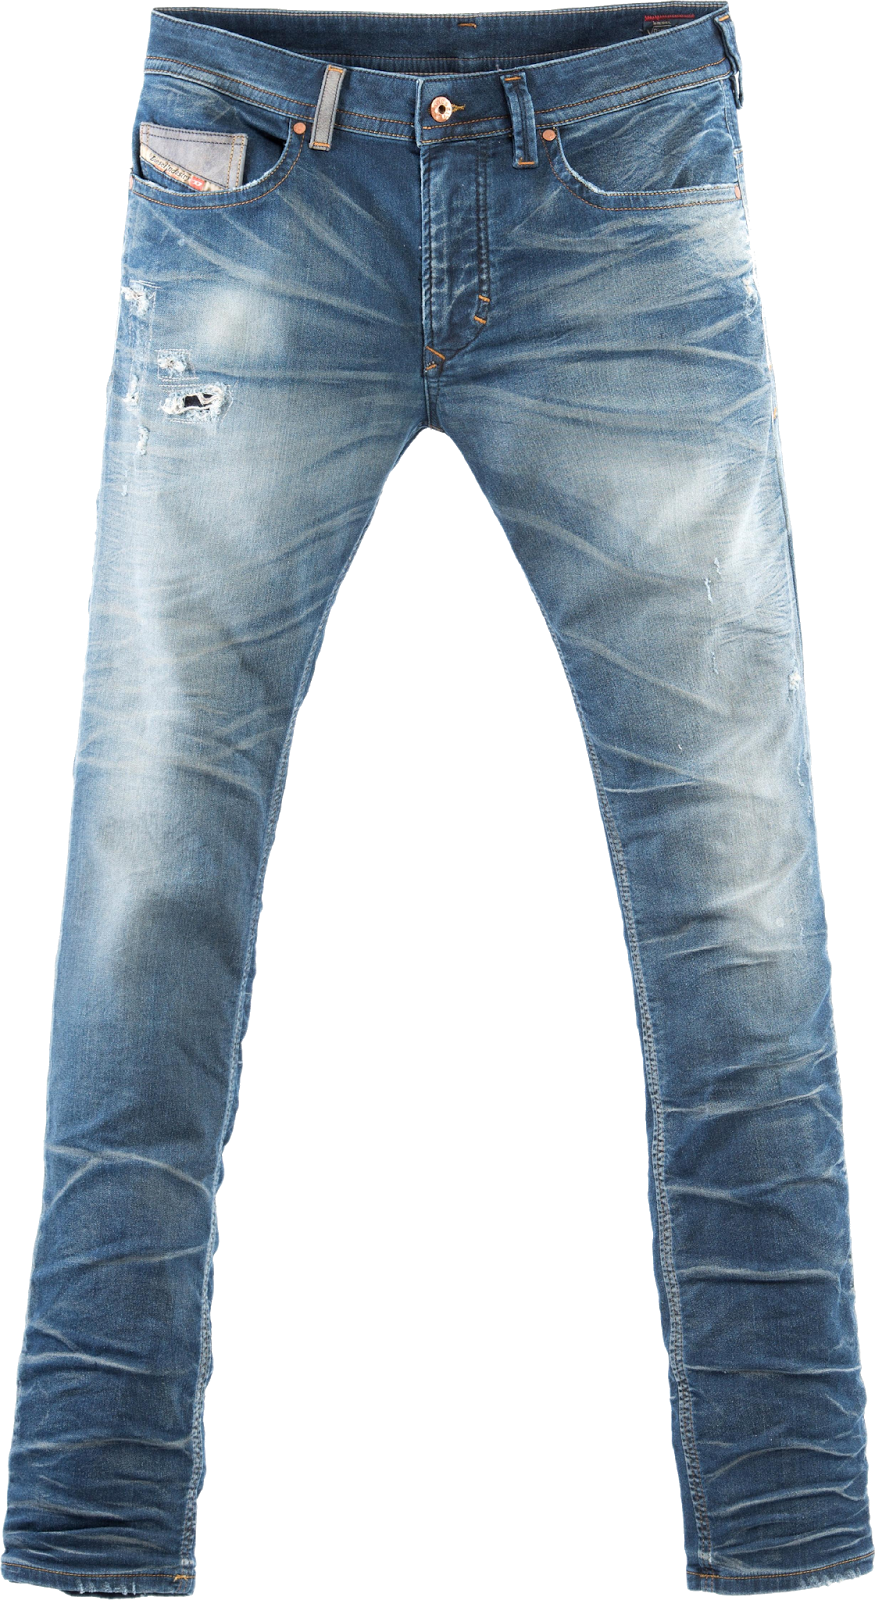 Jeans Png Hd